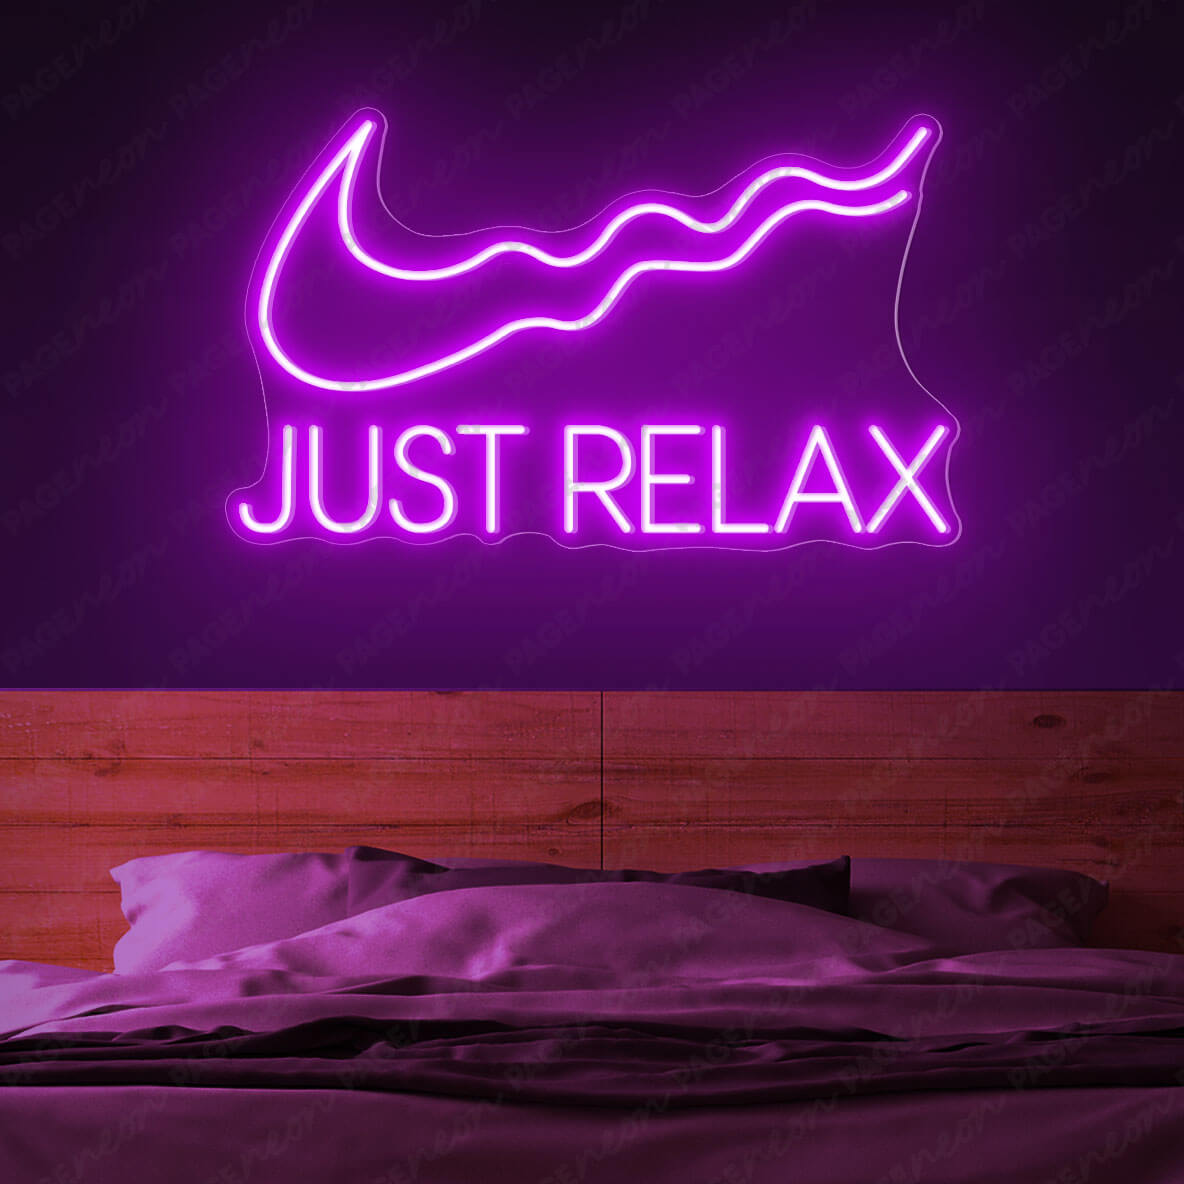 Just Relax Neon Sign Led Light Purple